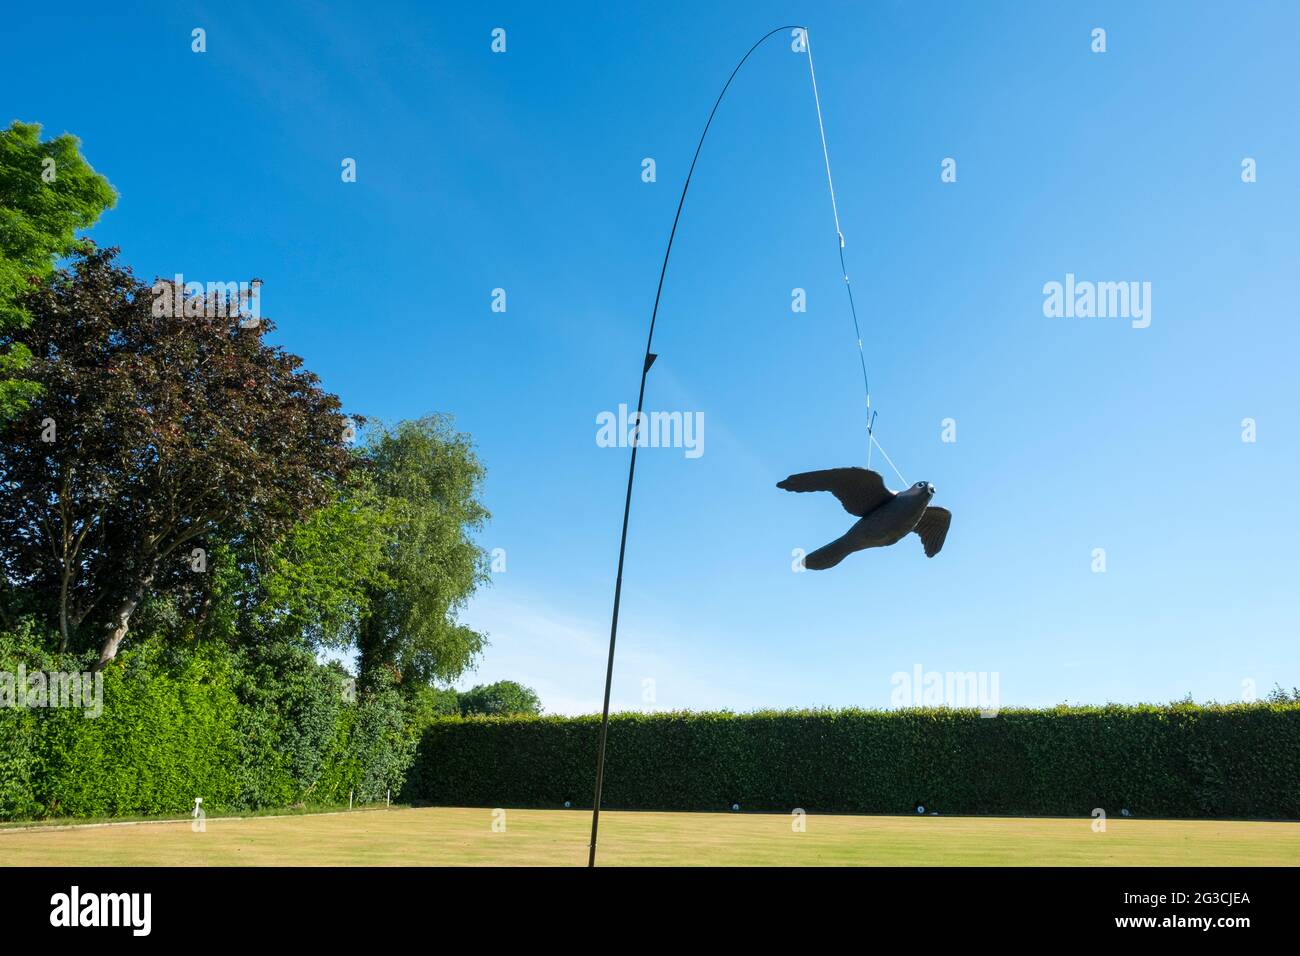 A bird scarer kite being used on a bowling green as a bird deterrent. Stock Photo